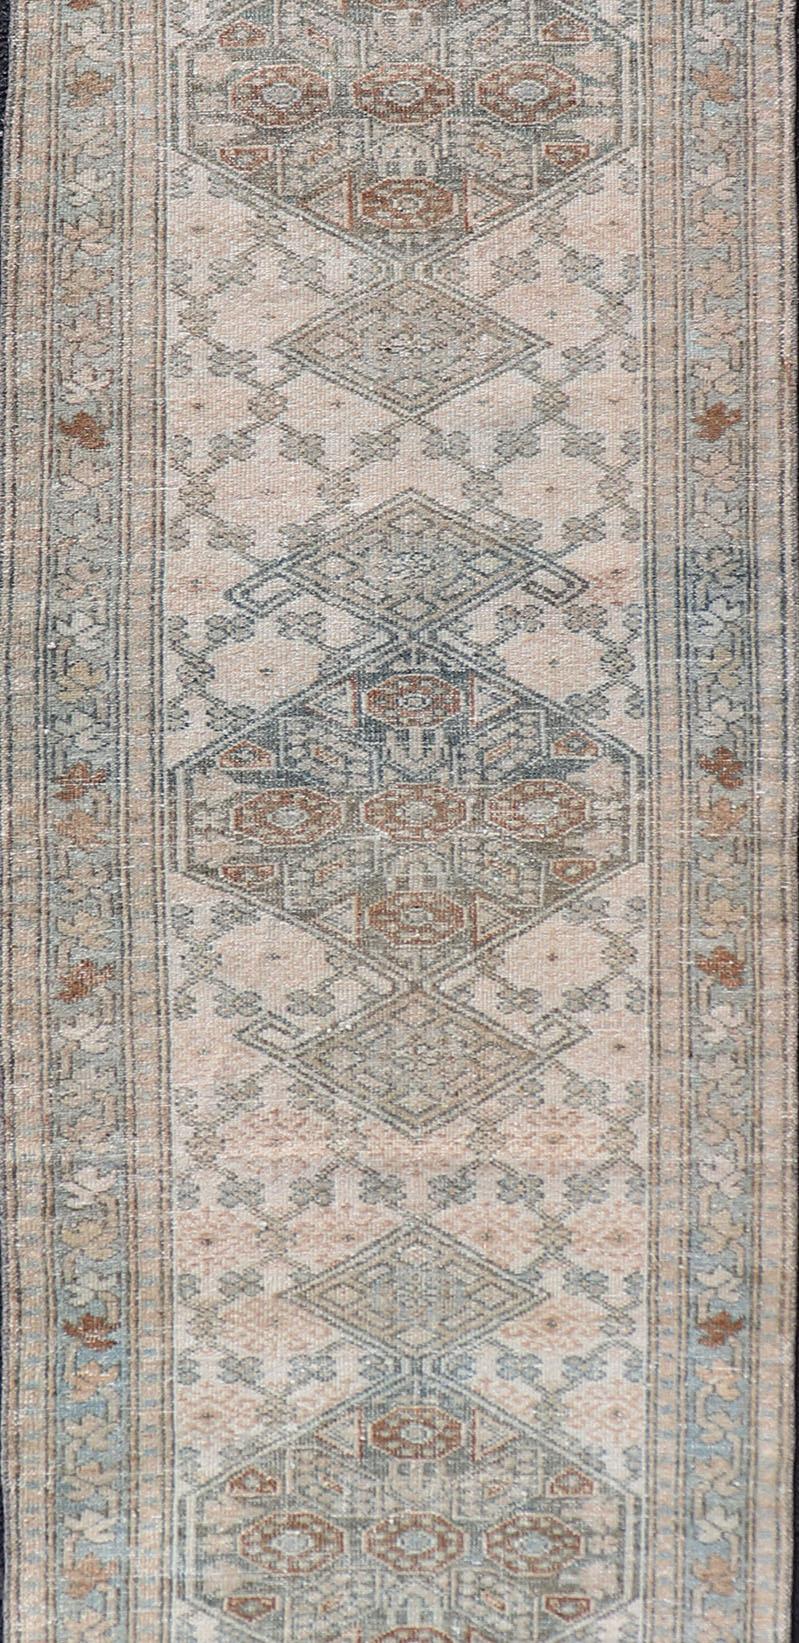 Antique Persian Sarab Runner with Sub-Geometric Design in Light Blue, Tan, Grey In Good Condition For Sale In Atlanta, GA